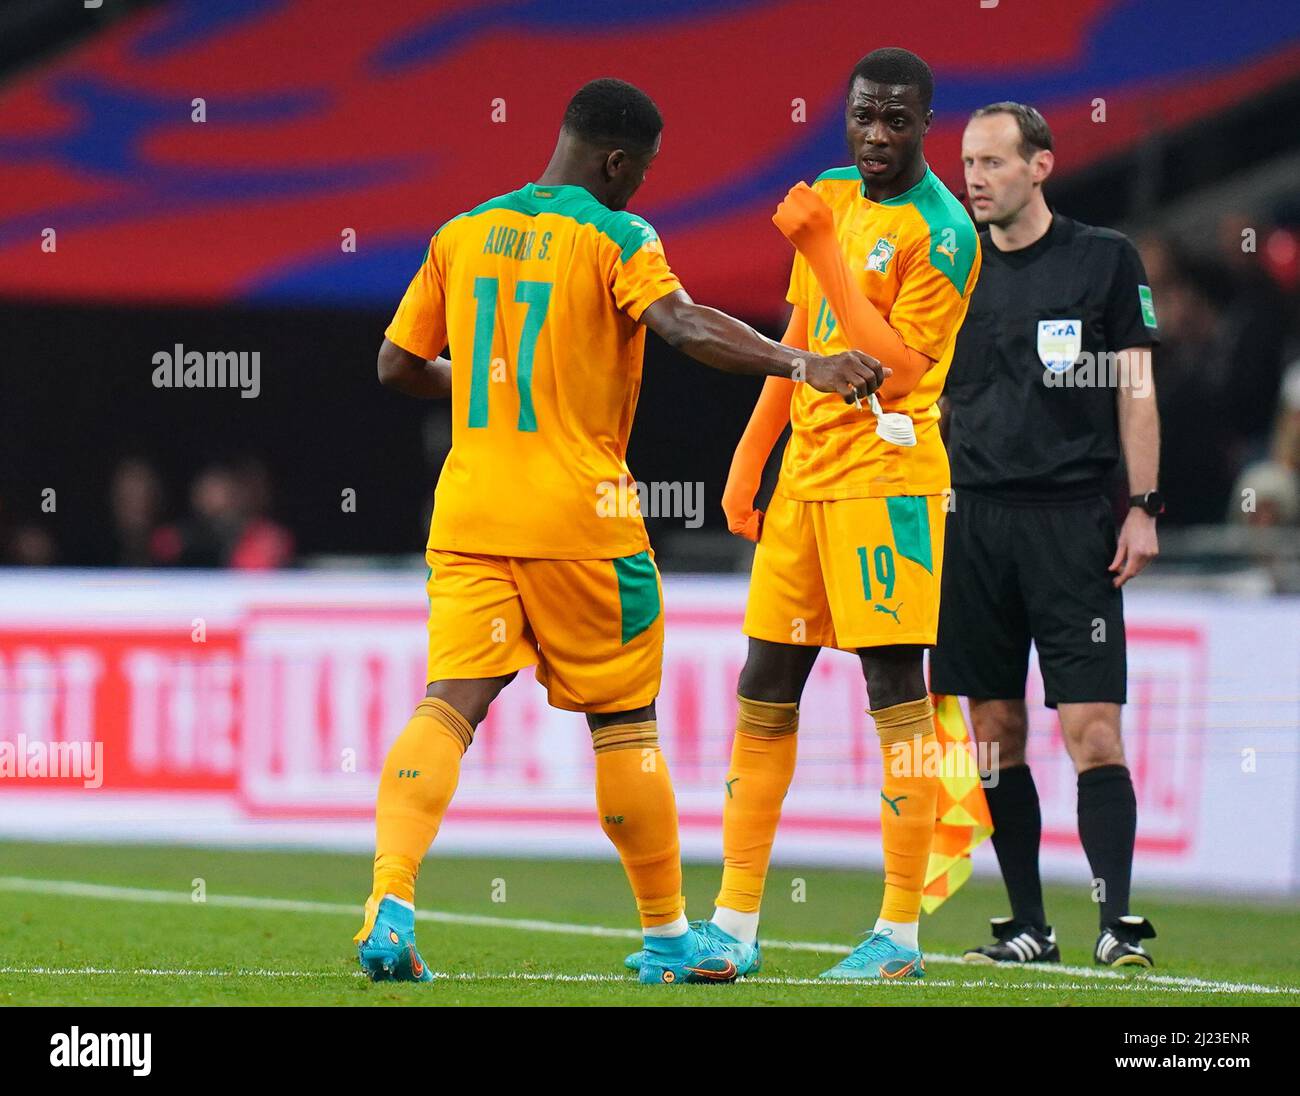 Ivory Coast's Serge Aurier (left) leaves the game after being shown a red card, walks past team-mate Nicolas Pepe during the international friendly match at Wembley Stadium, London. Picture date: March